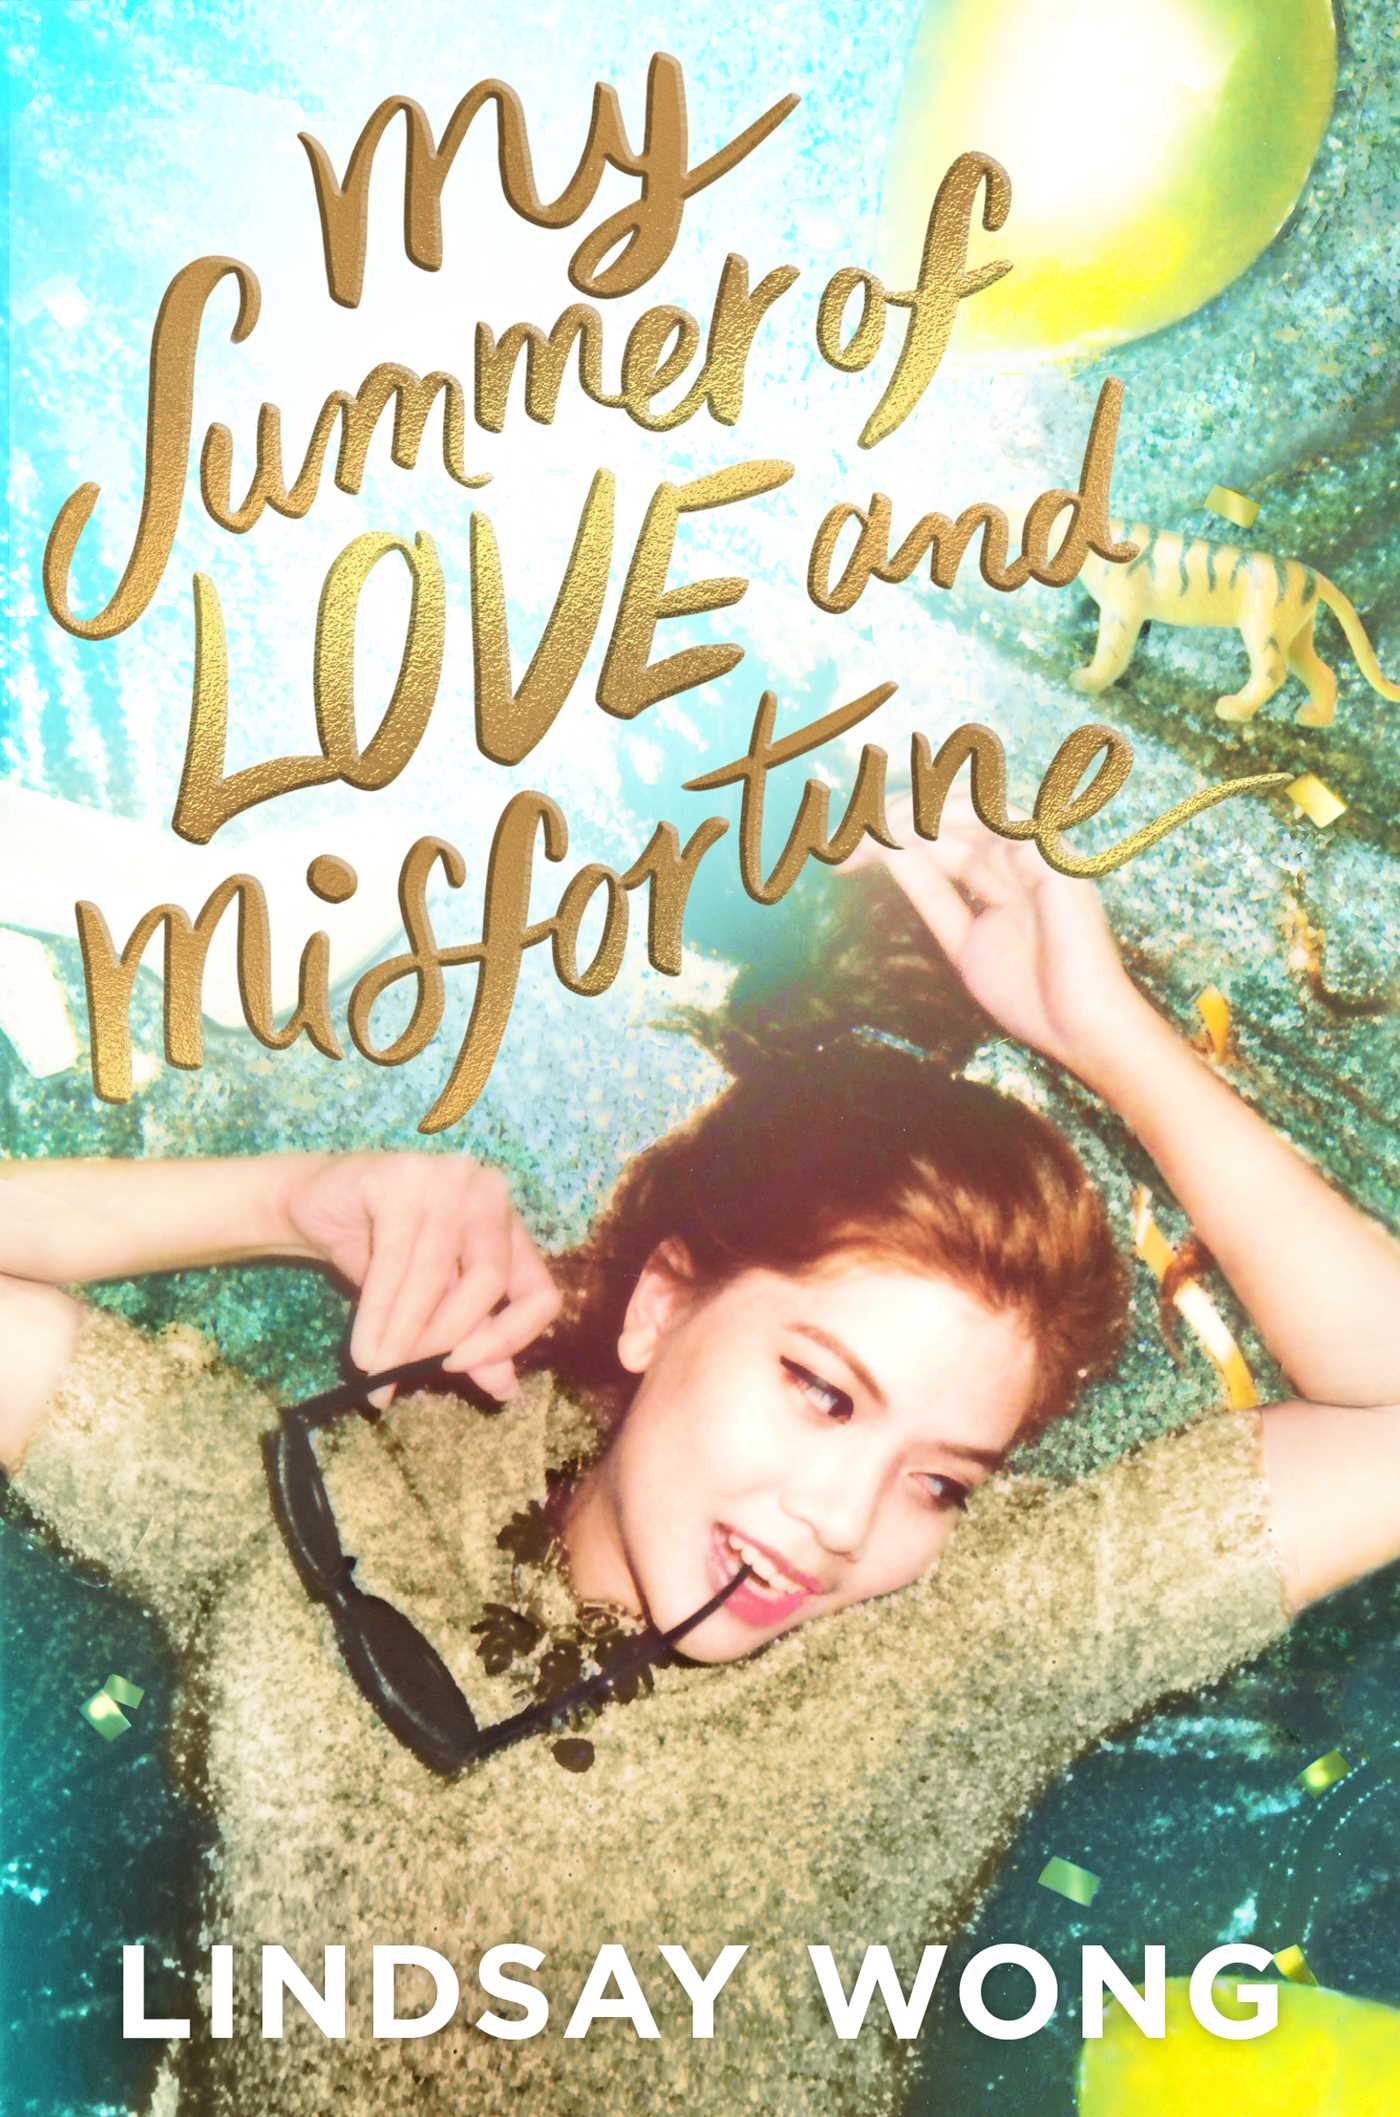 My Summer of Love and Misfortune - Lindsay Wong